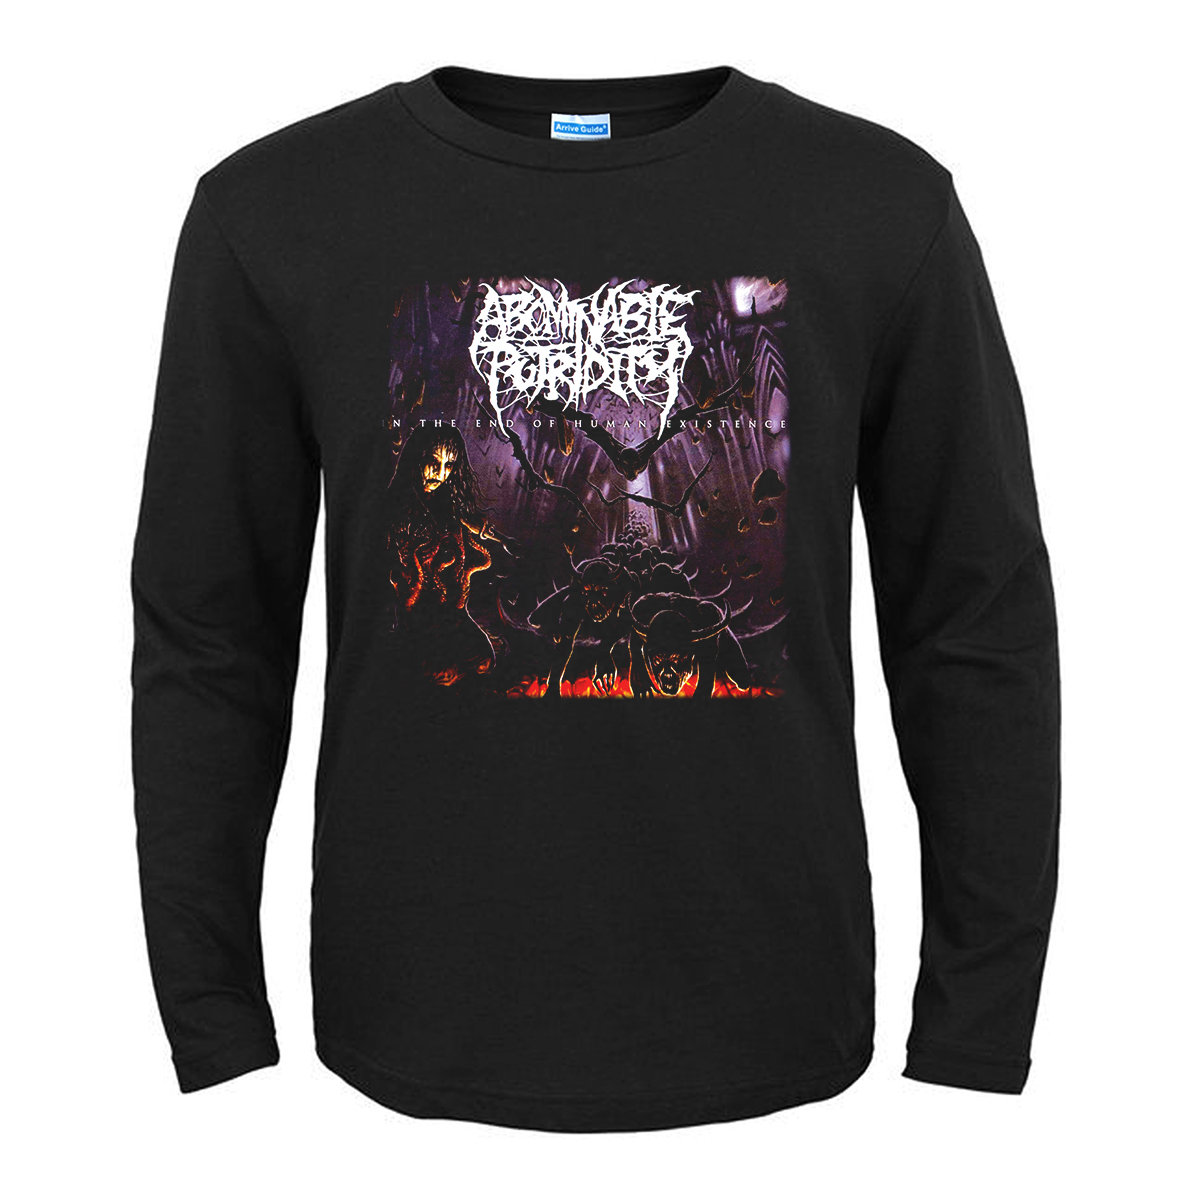 Collectibles T-Shirt Abominable Putridity In The End Of Human Existence